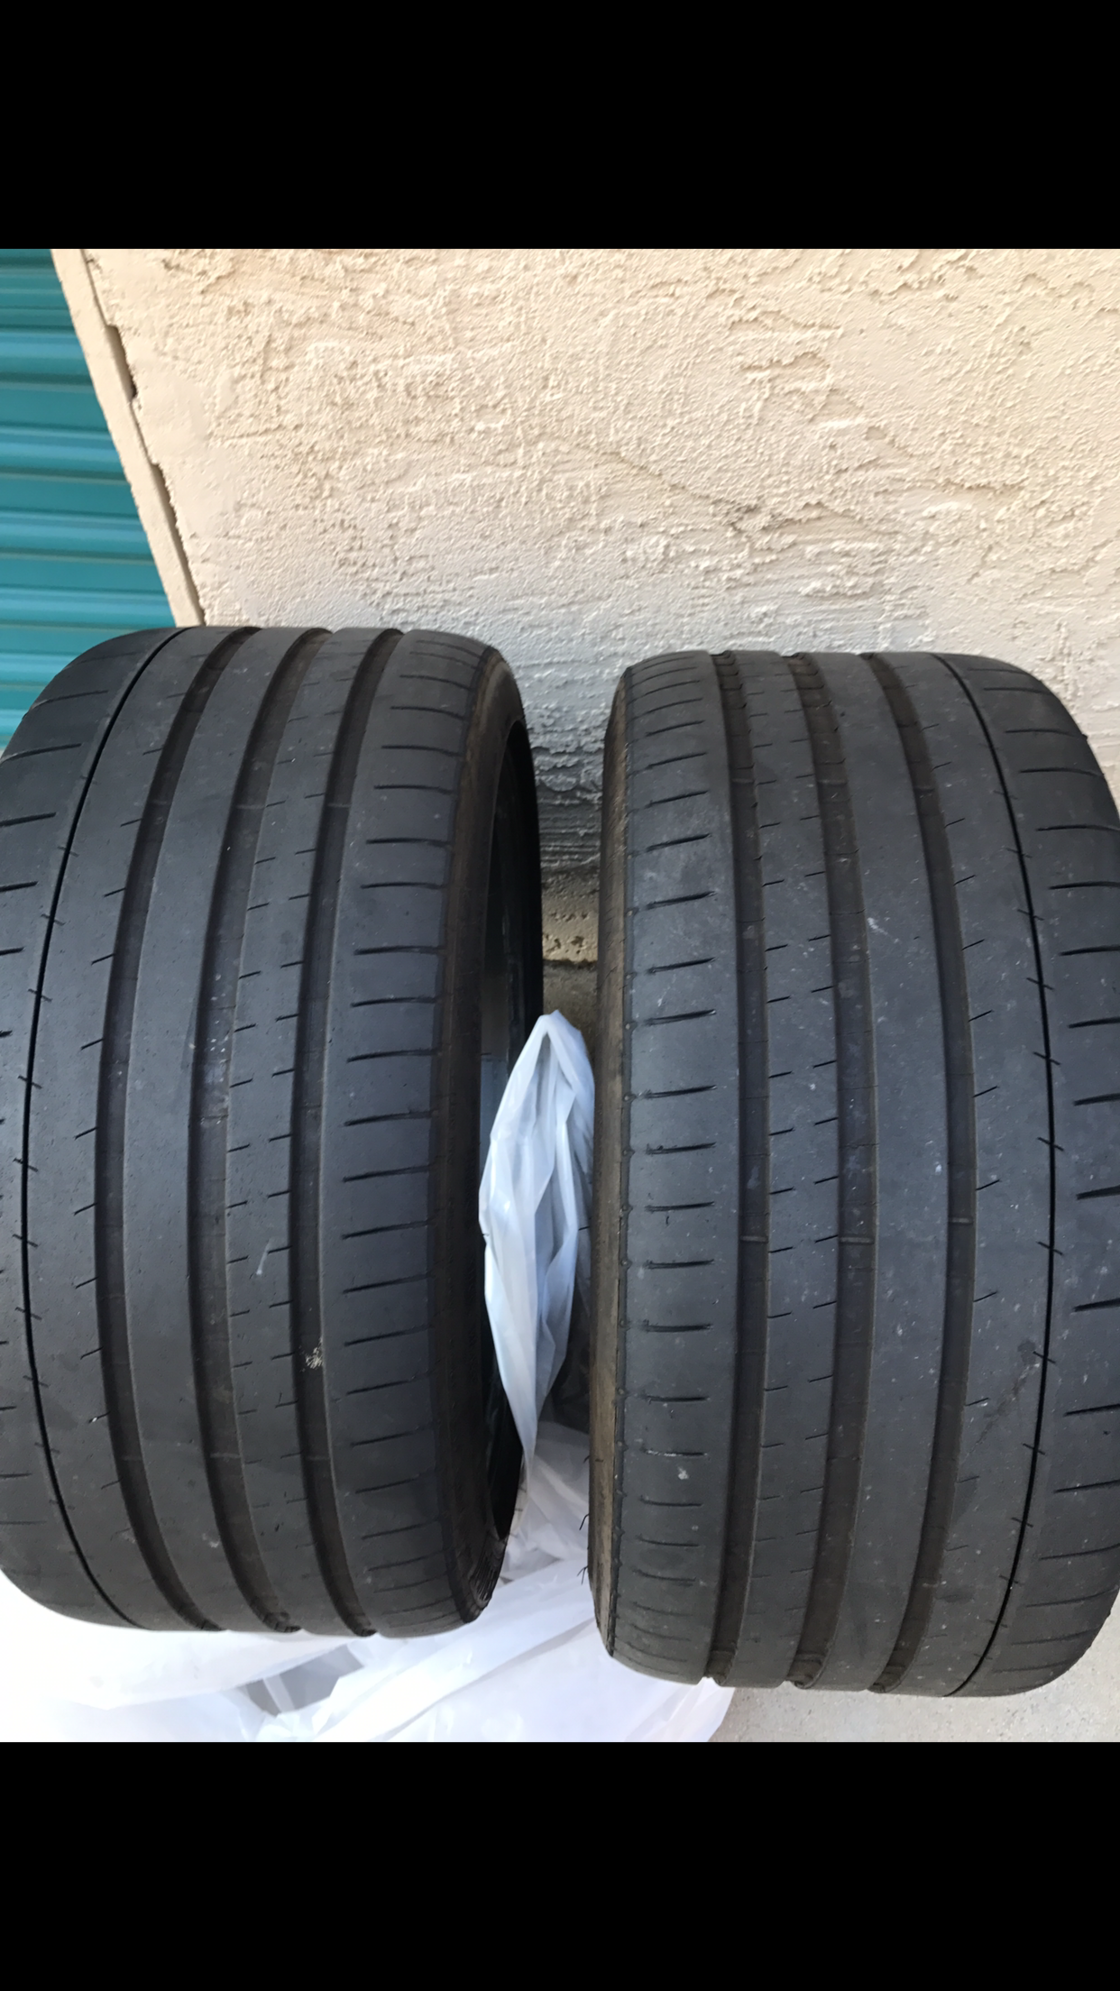 Wheels and Tires/Axles - Pilot Super Sports (2) - 255/35/19 - 50 bucks - Used - All Years Lexus IS F - San Diego, CA 92131, United States